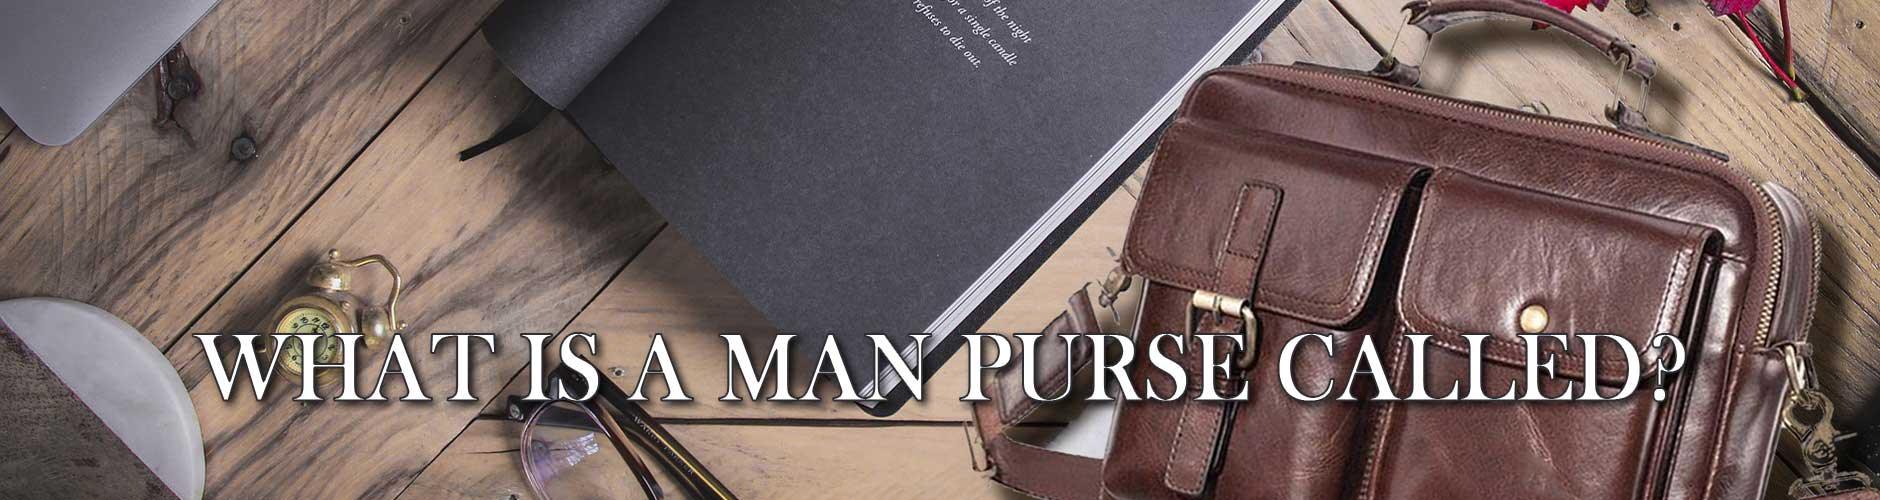 what is a man purse called